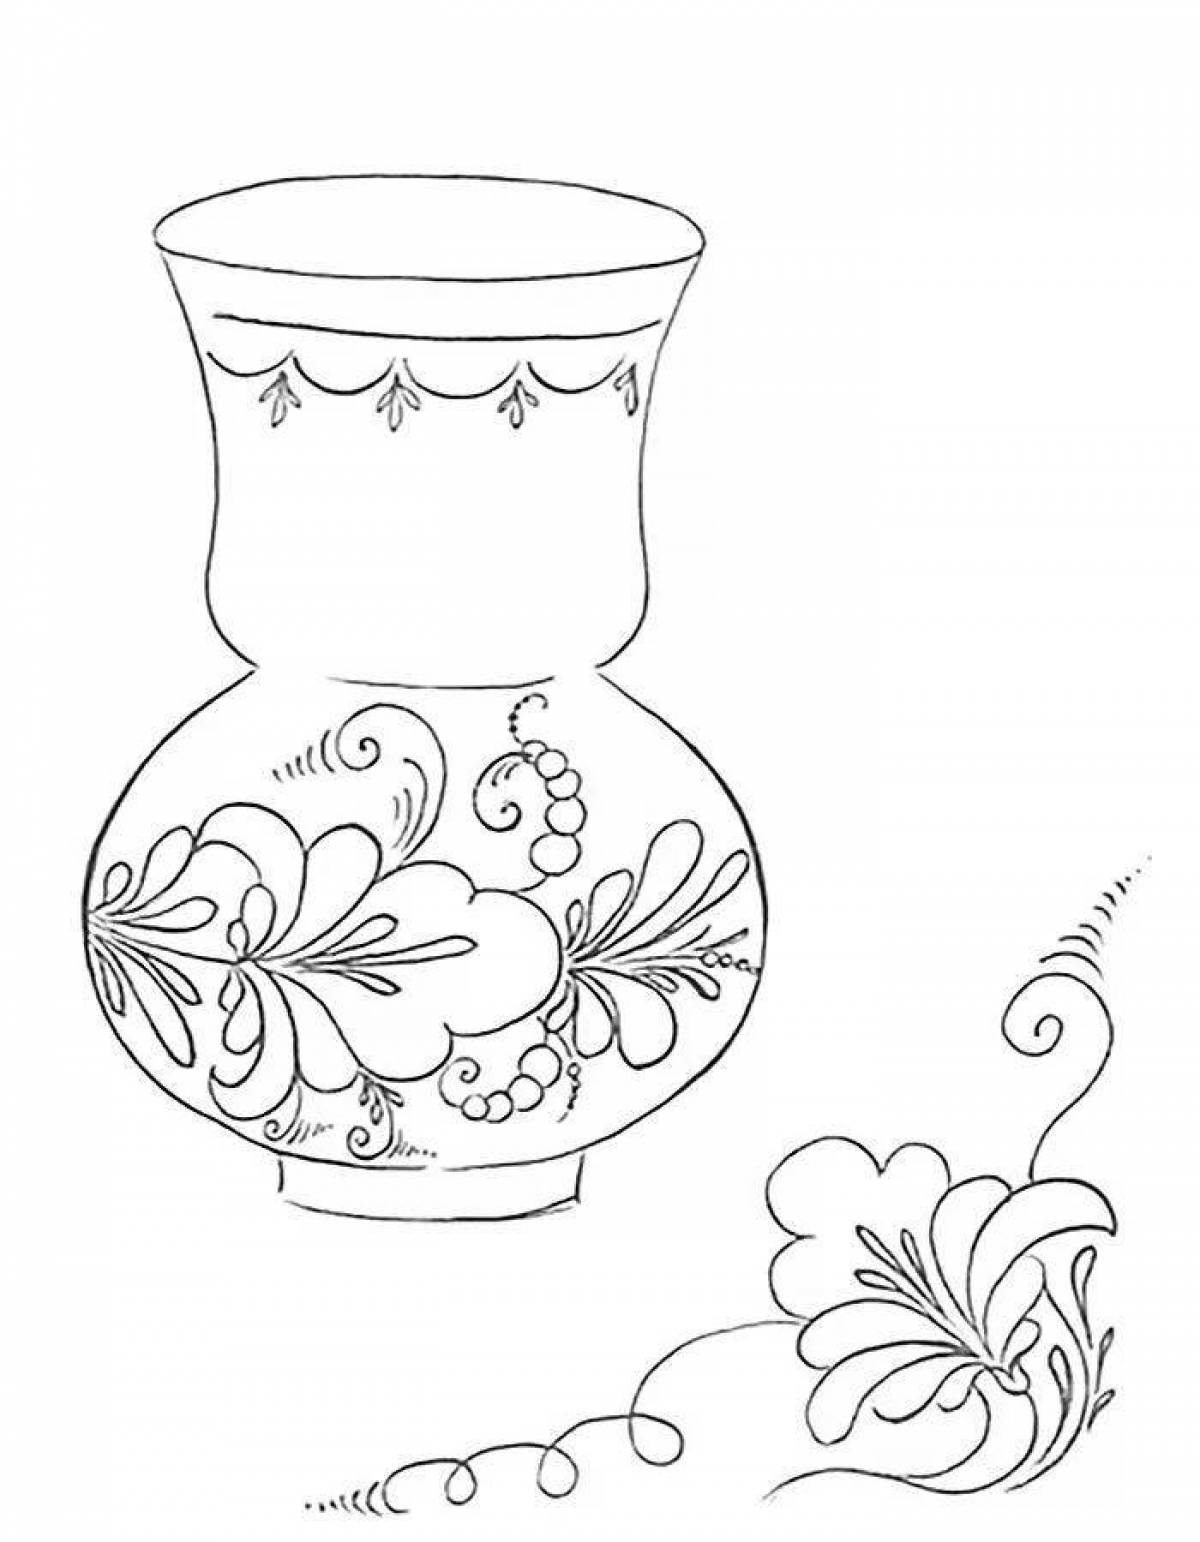 Coloring for a nice jug gzhel